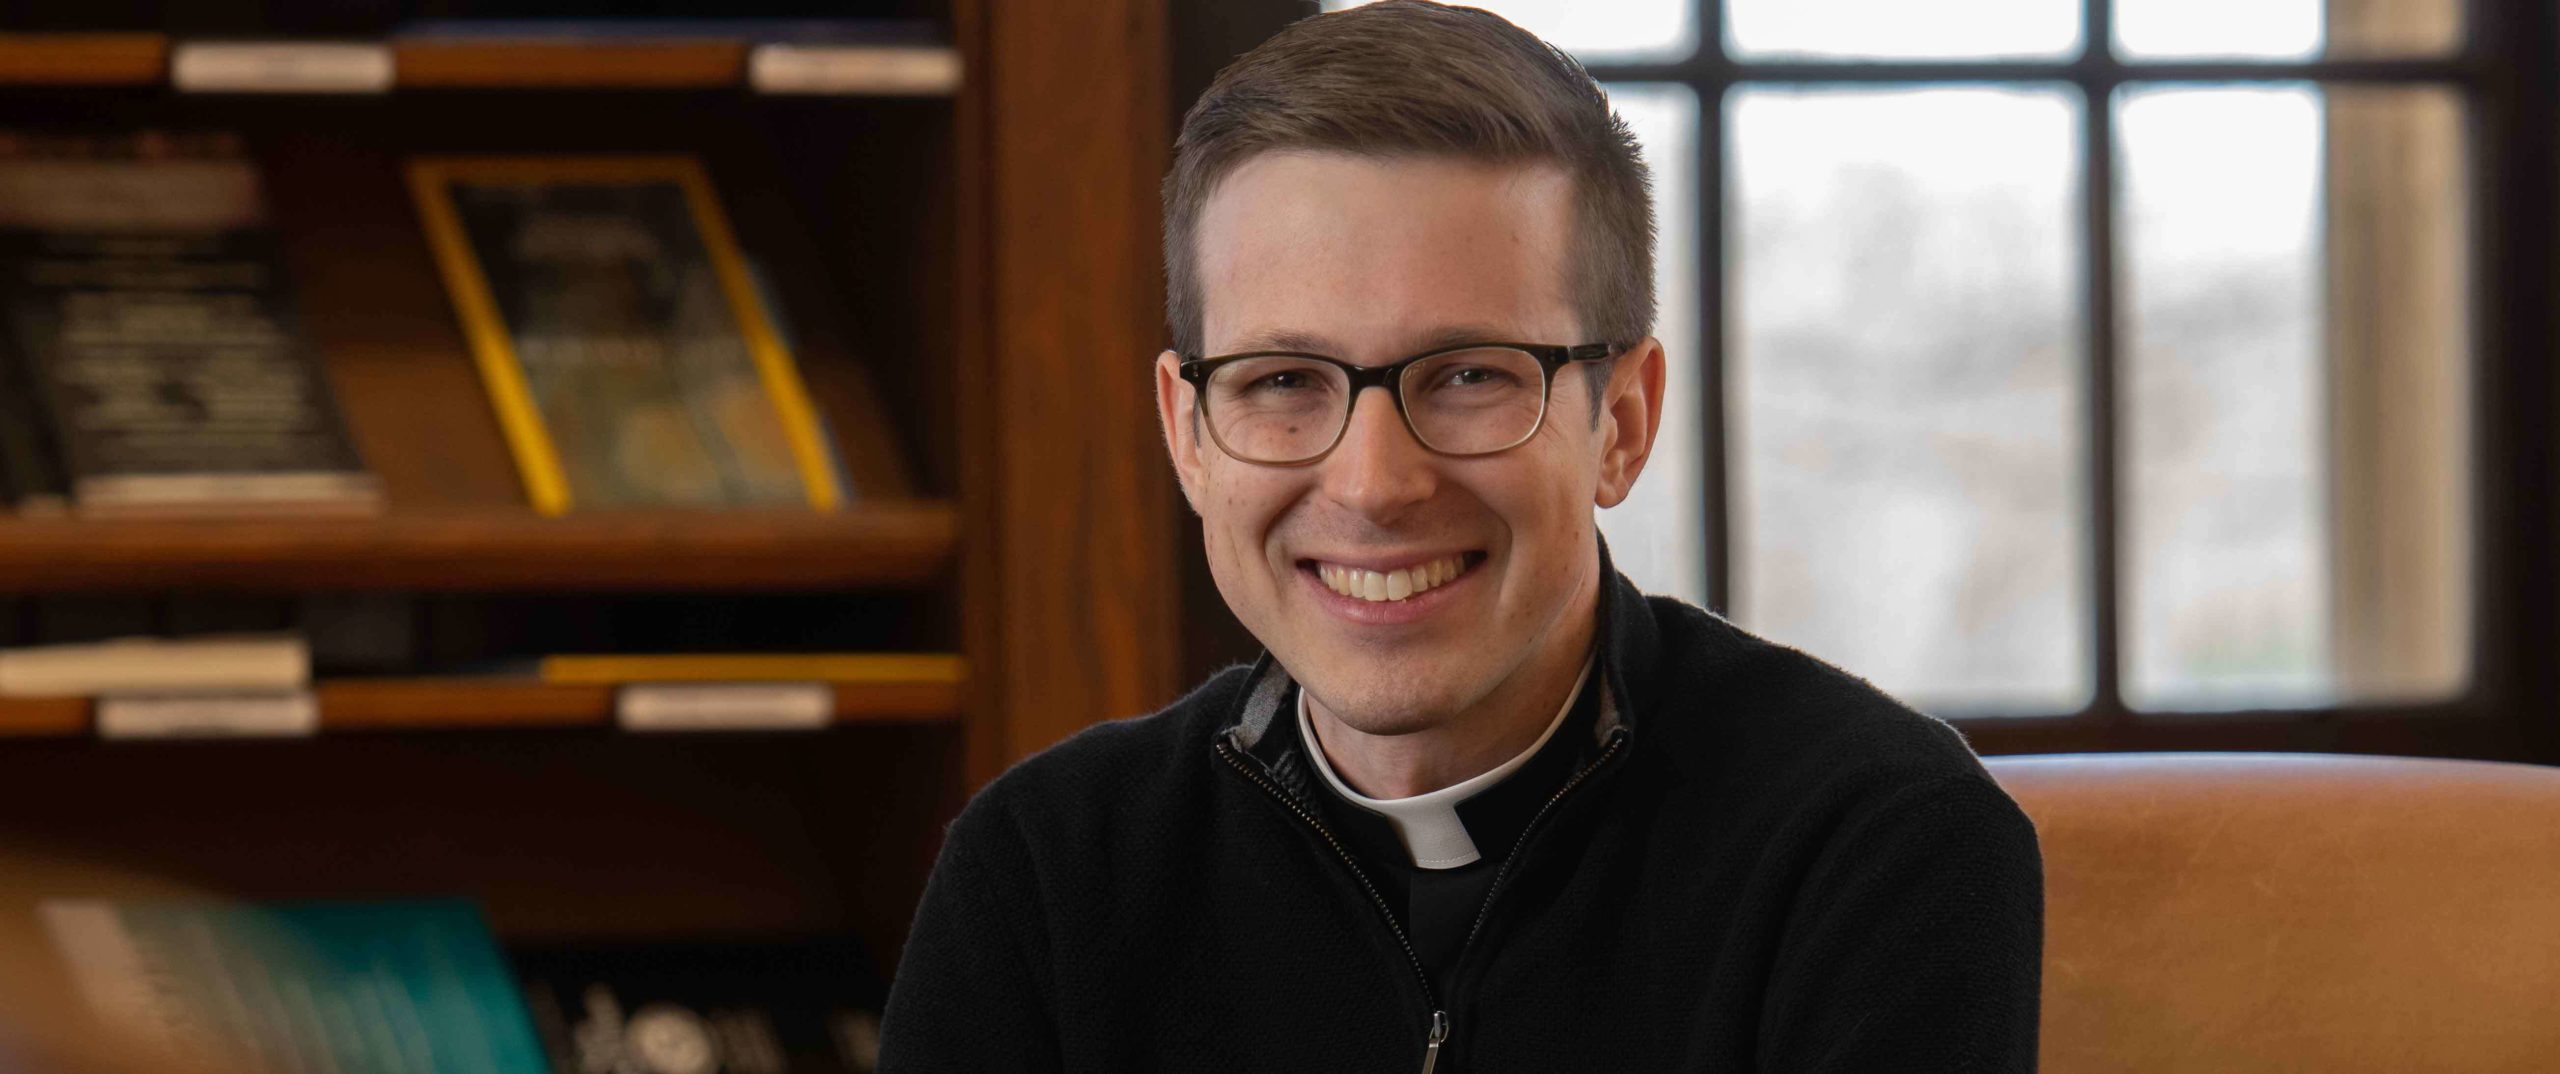 Future priest hopes to offer ‘authentic witness’ to Gospel